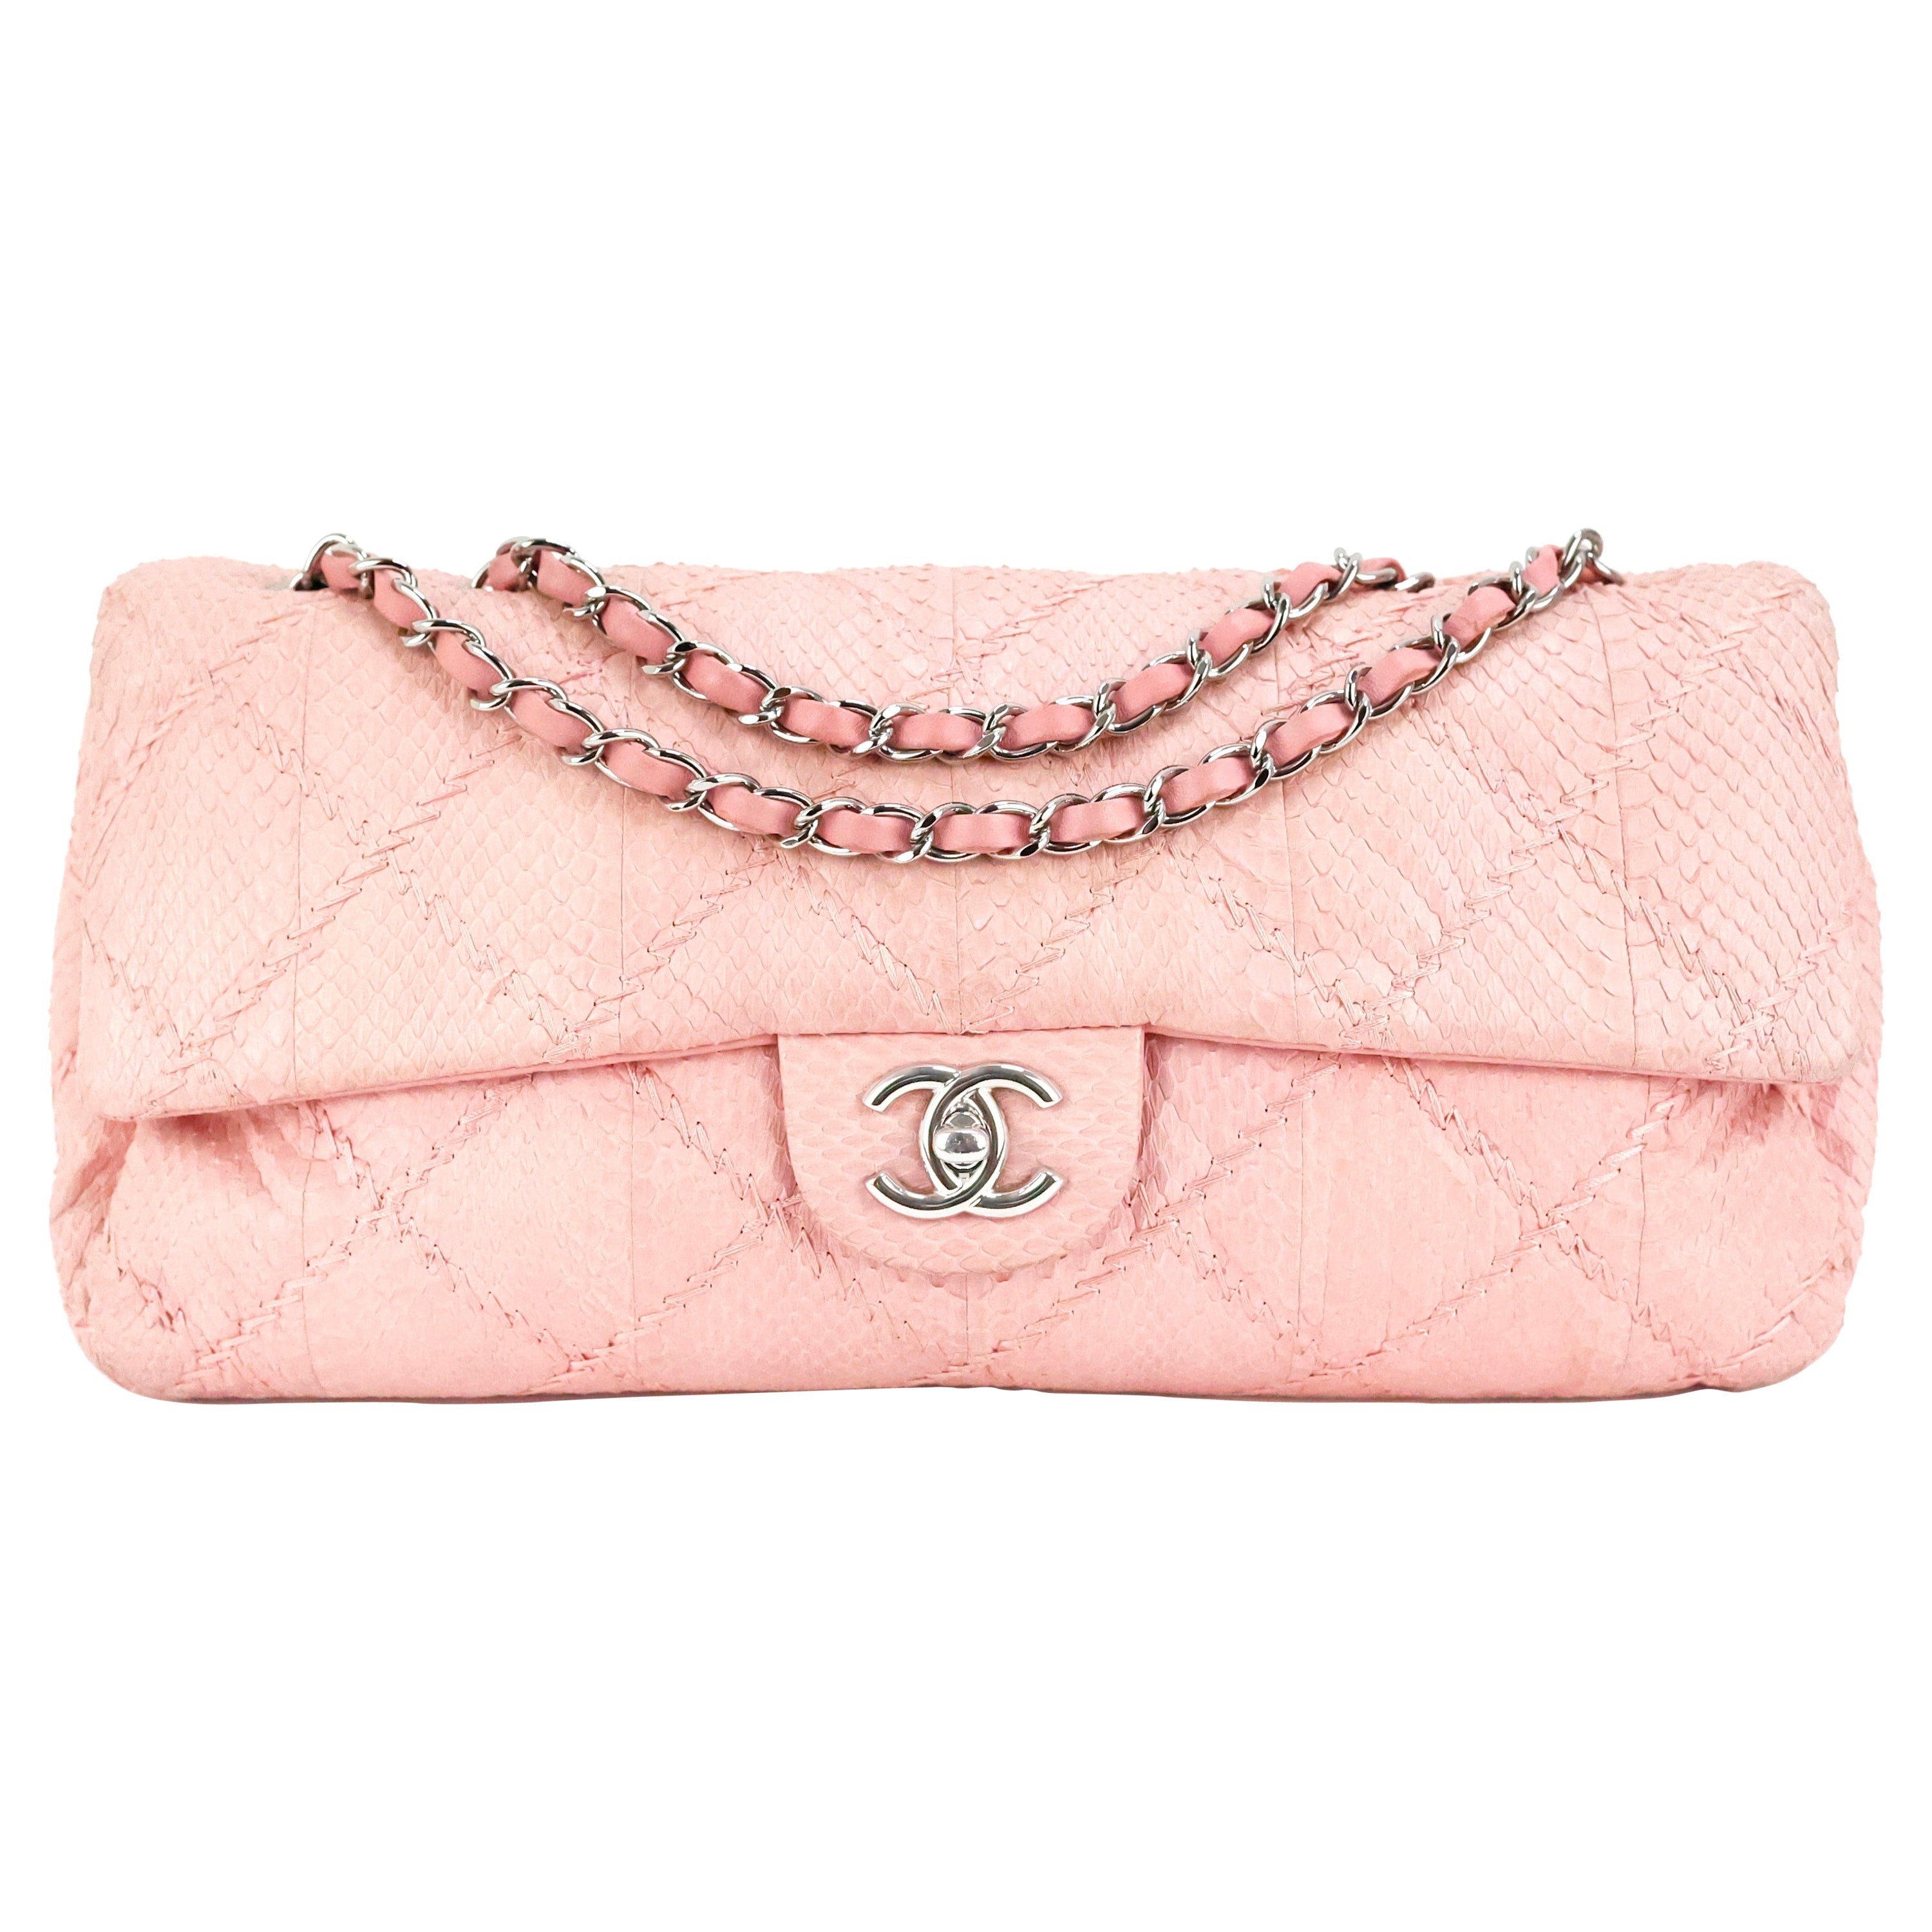 Chanel Classic Flap Bag in light pink Python leather For Sale